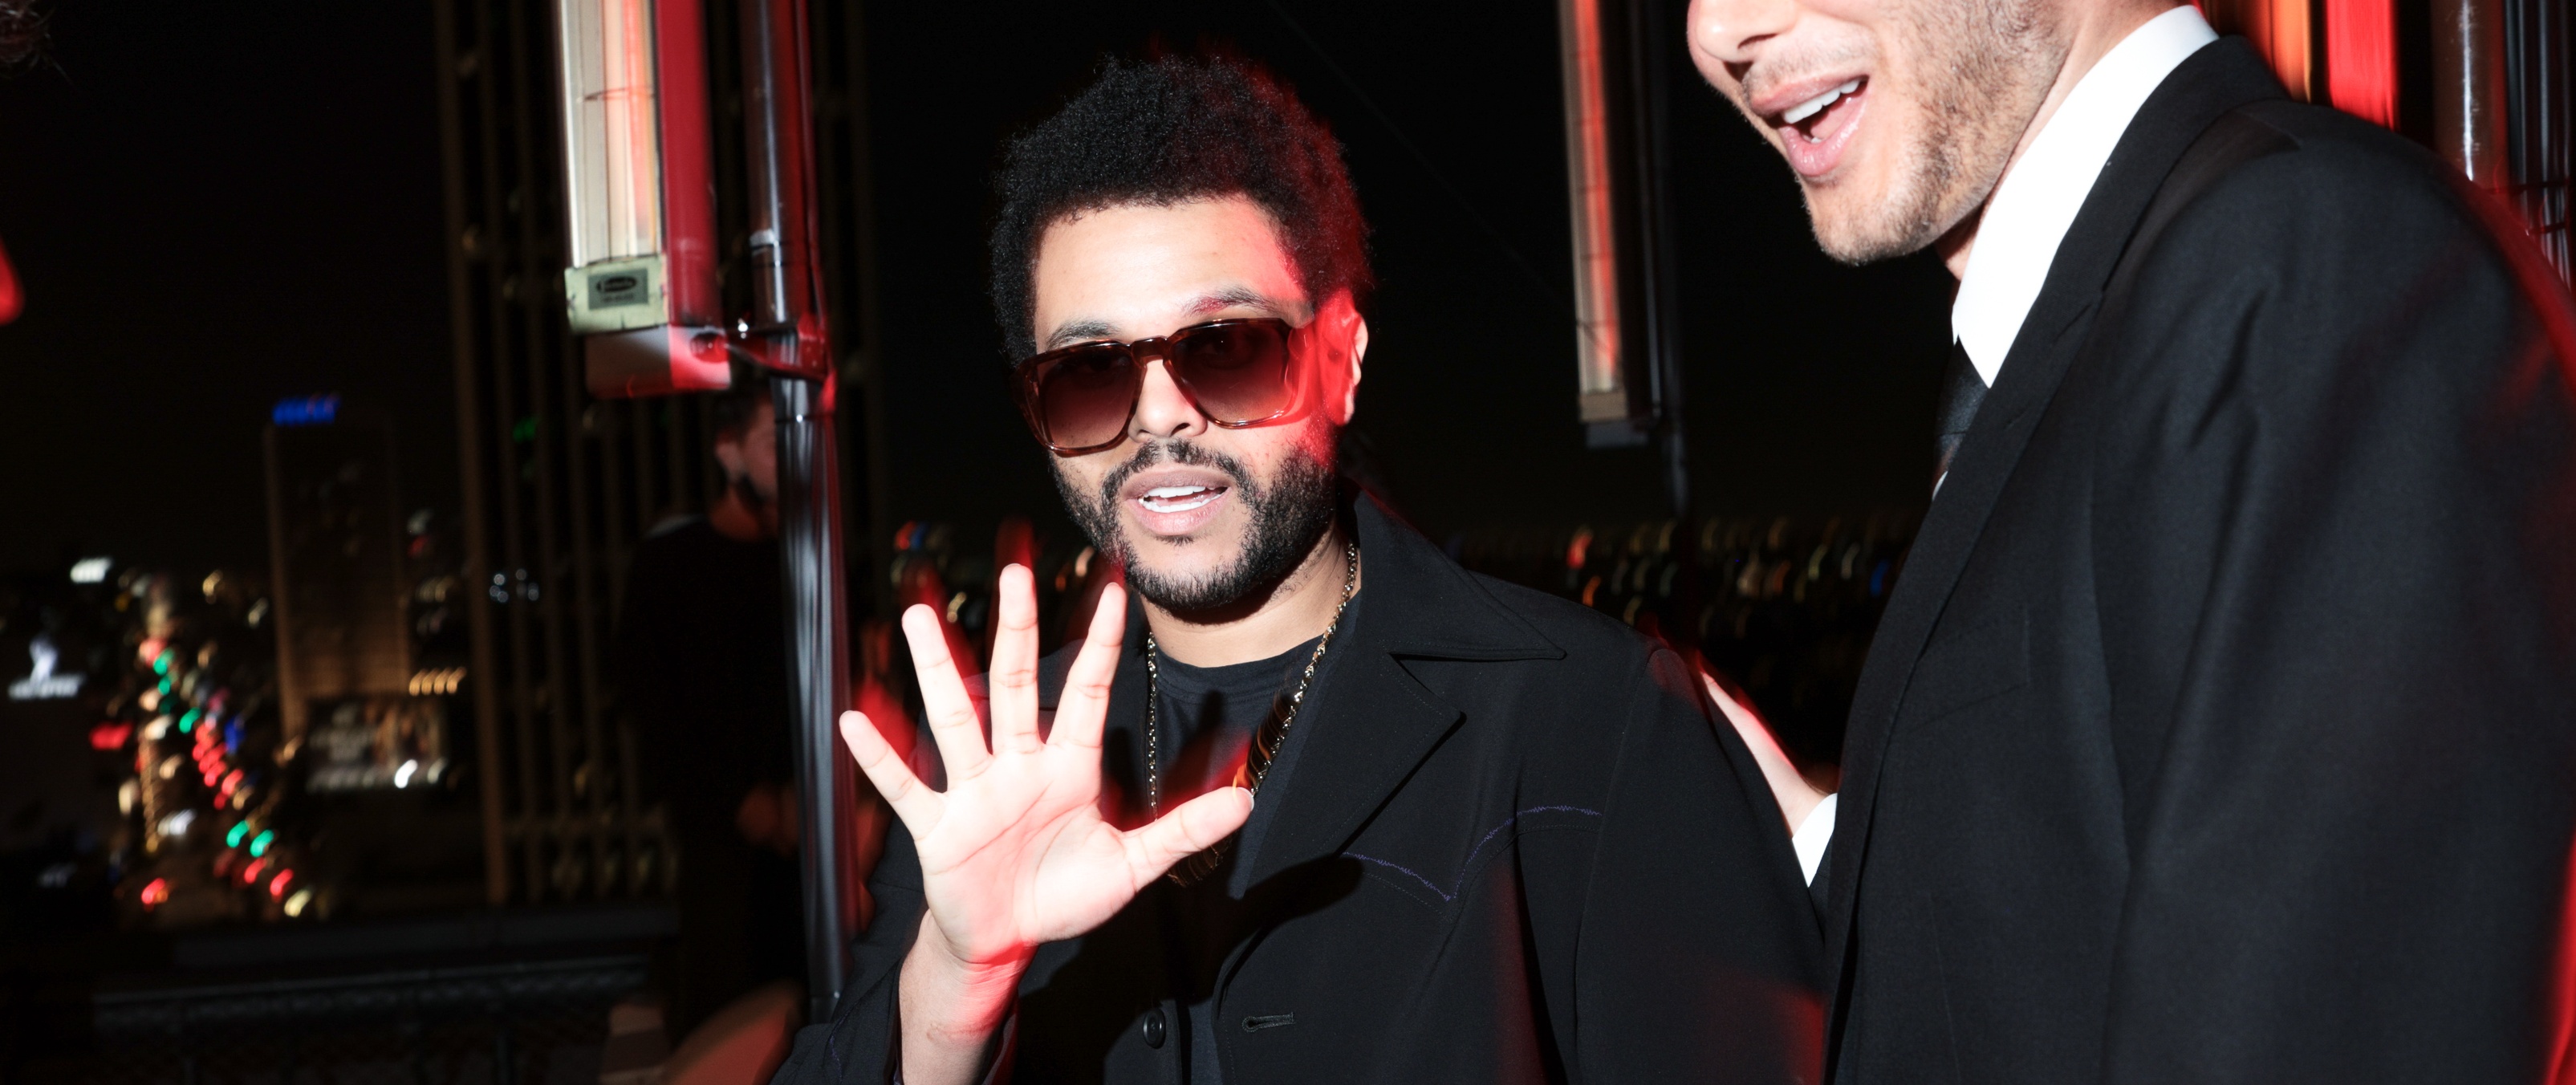 ATL-concerts-the-weeknd-BFA-zack-whitford_Cropped.jpg